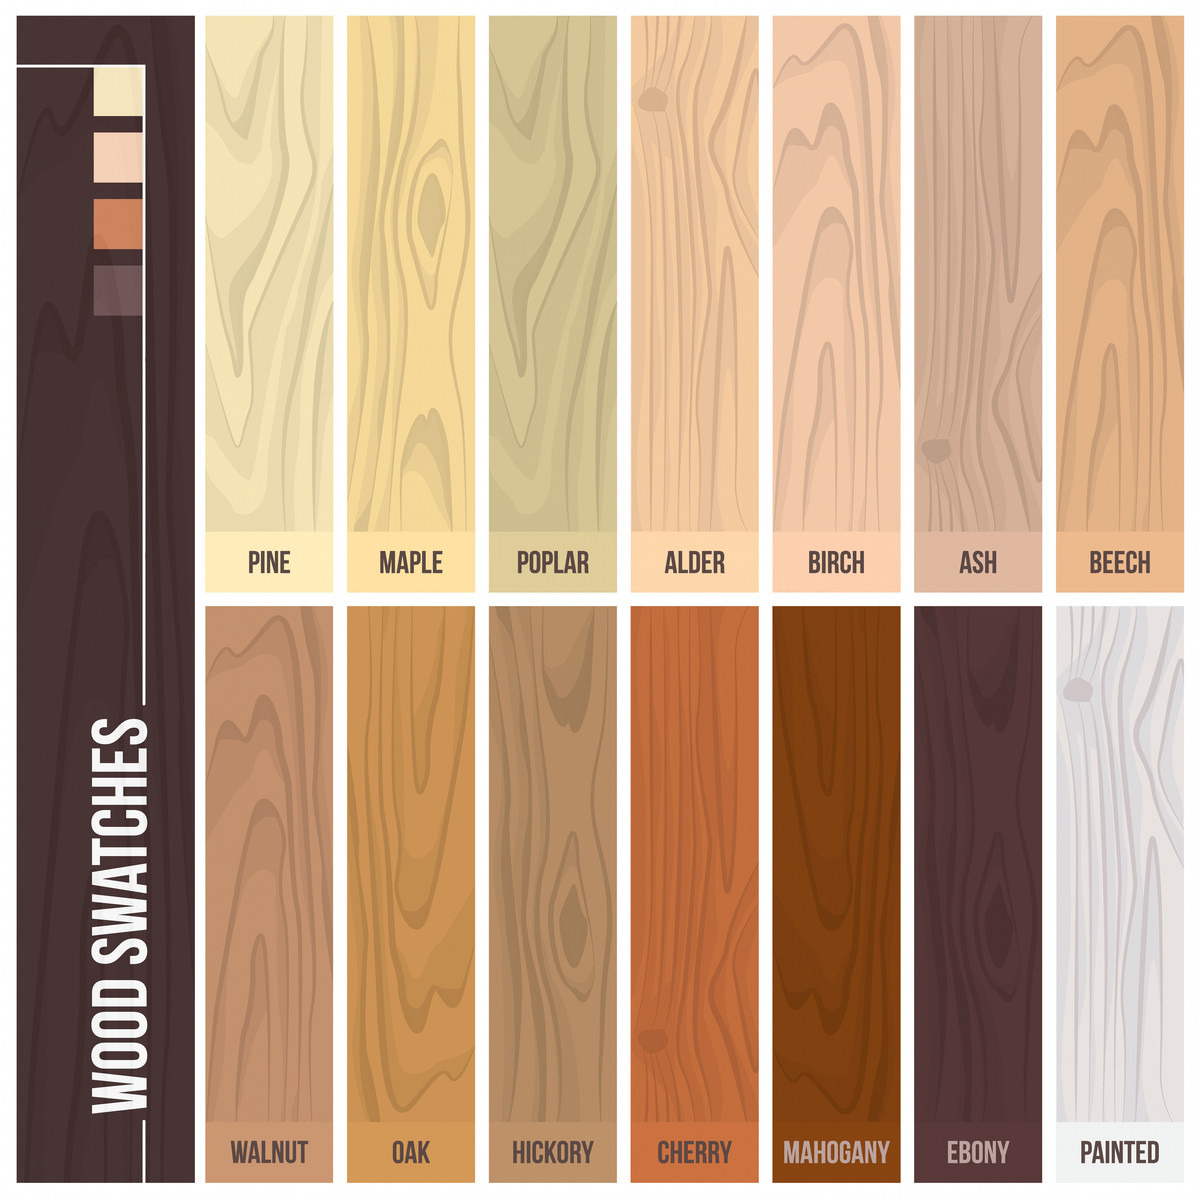 18 Unique Prefinished Hardwood Flooring Installation Cost Per Square Foot 2024 free download prefinished hardwood flooring installation cost per square foot of 12 types of hardwood flooring species styles edging dimensions in types of hardwood flooring illustrated guide